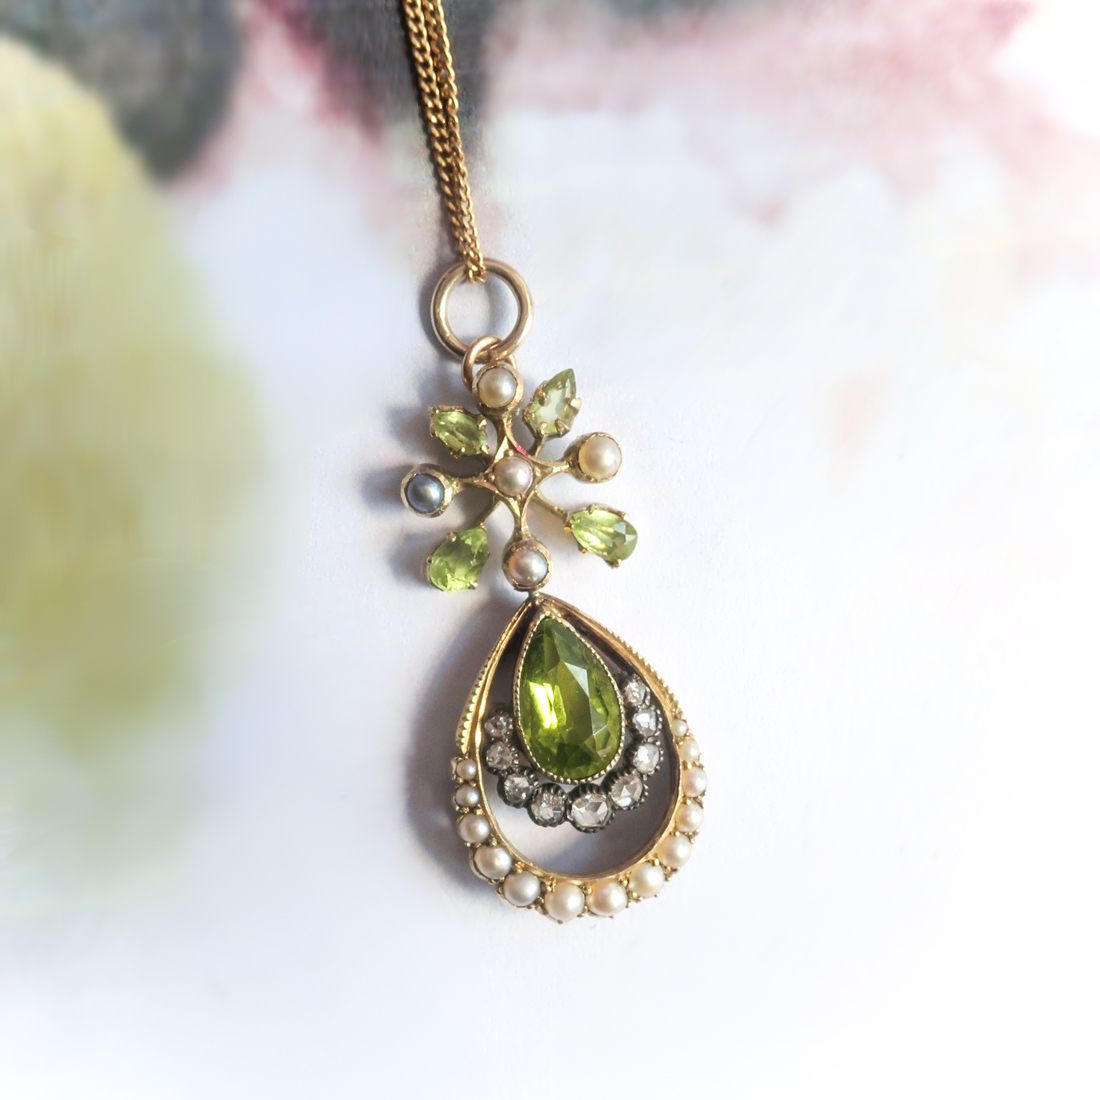 9ct Yellow Gold Antique Peridot and Pearl Necklace – BURLINGTON